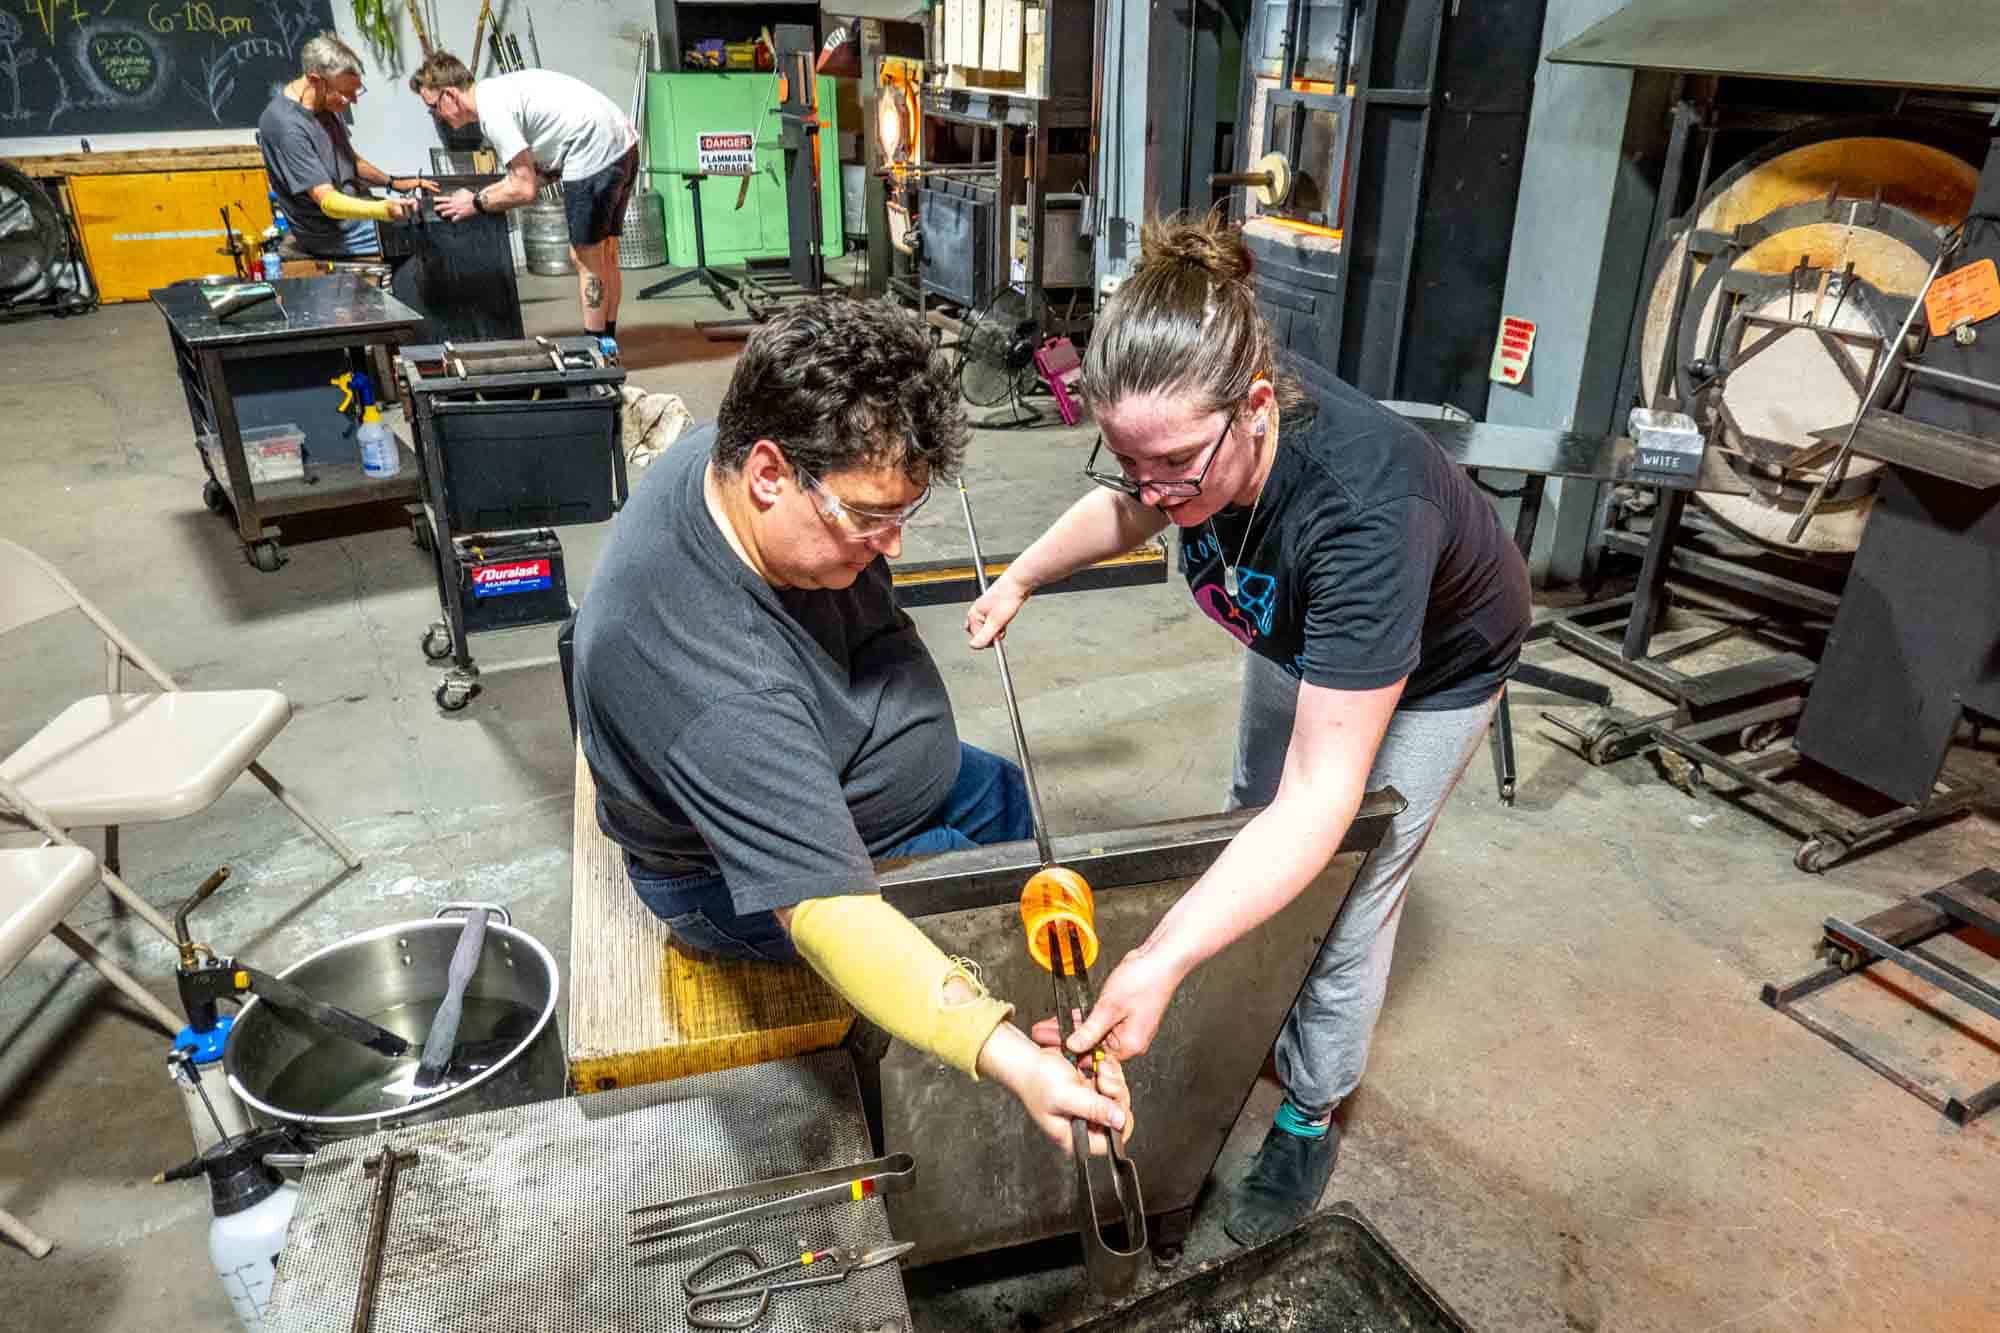 People making glass creations in a hot shop.